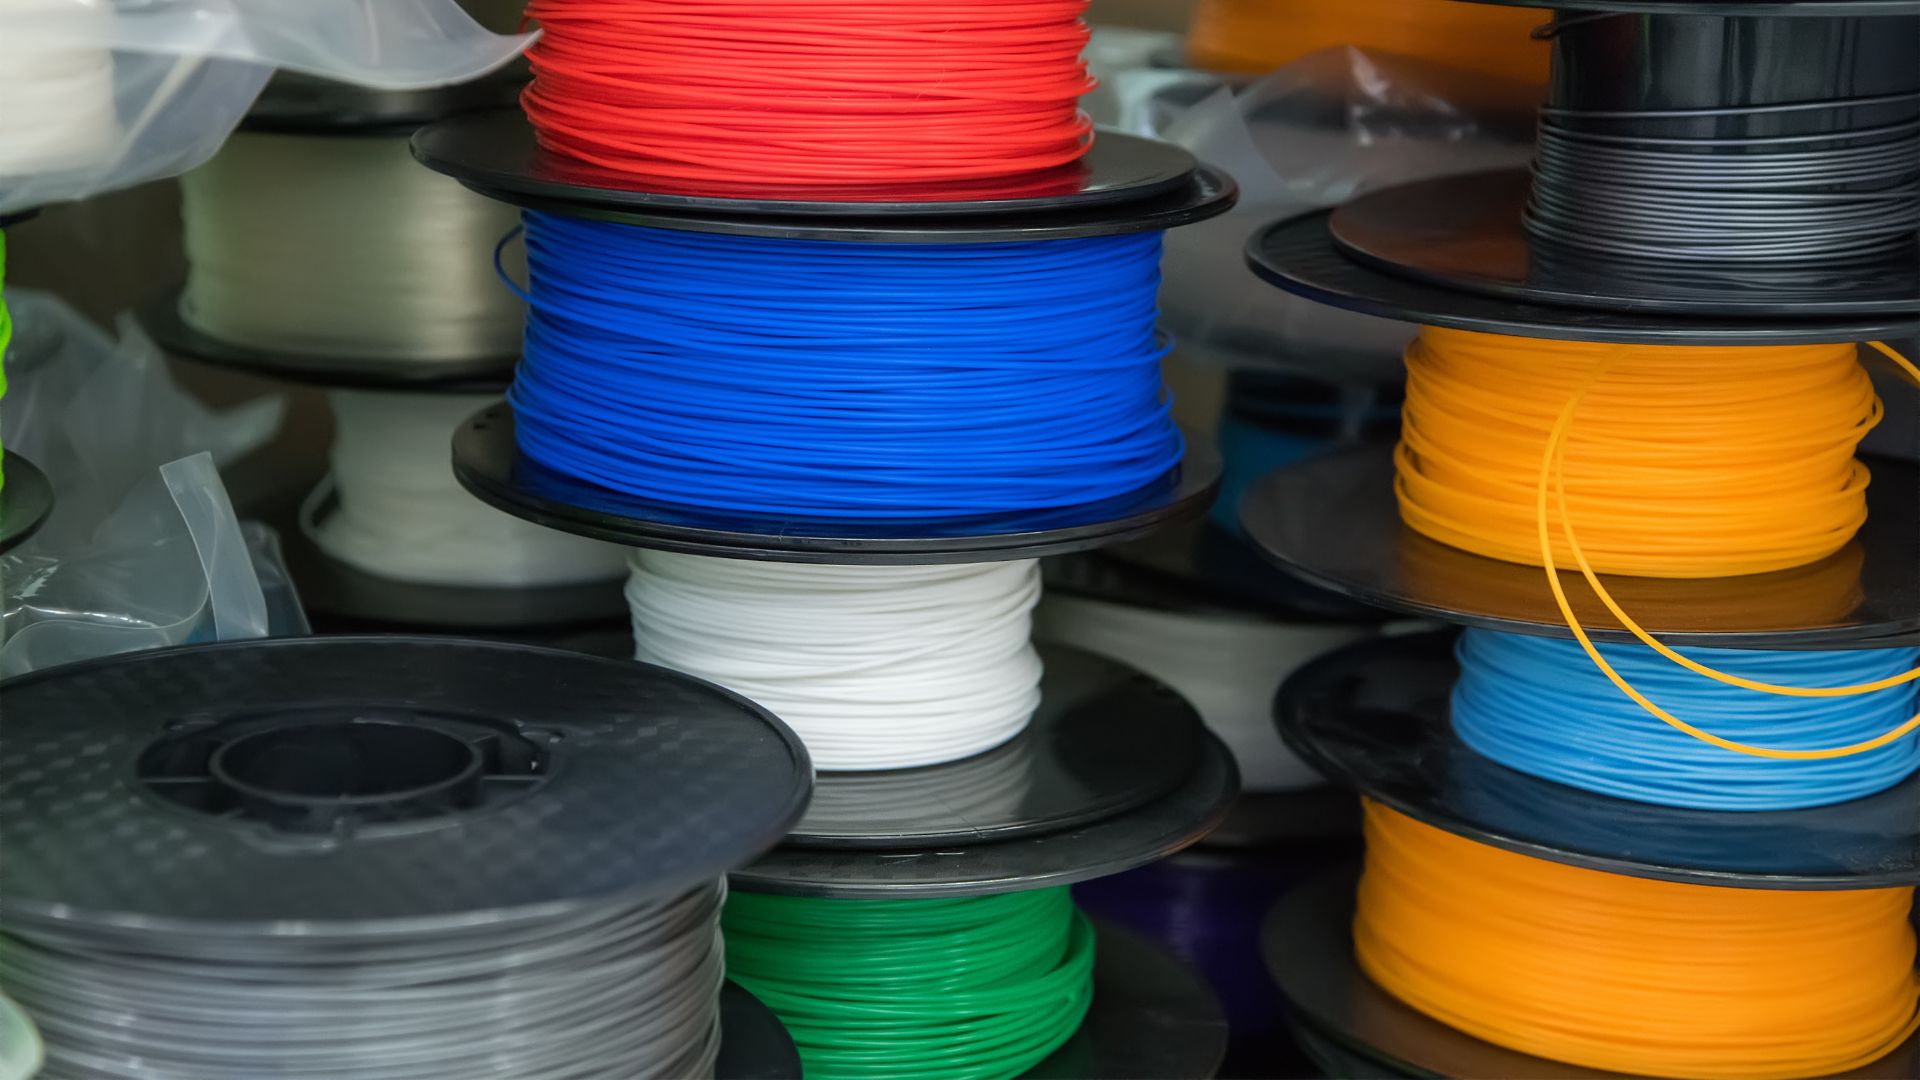 The Best Way To Store PETG 3D Printer Filament